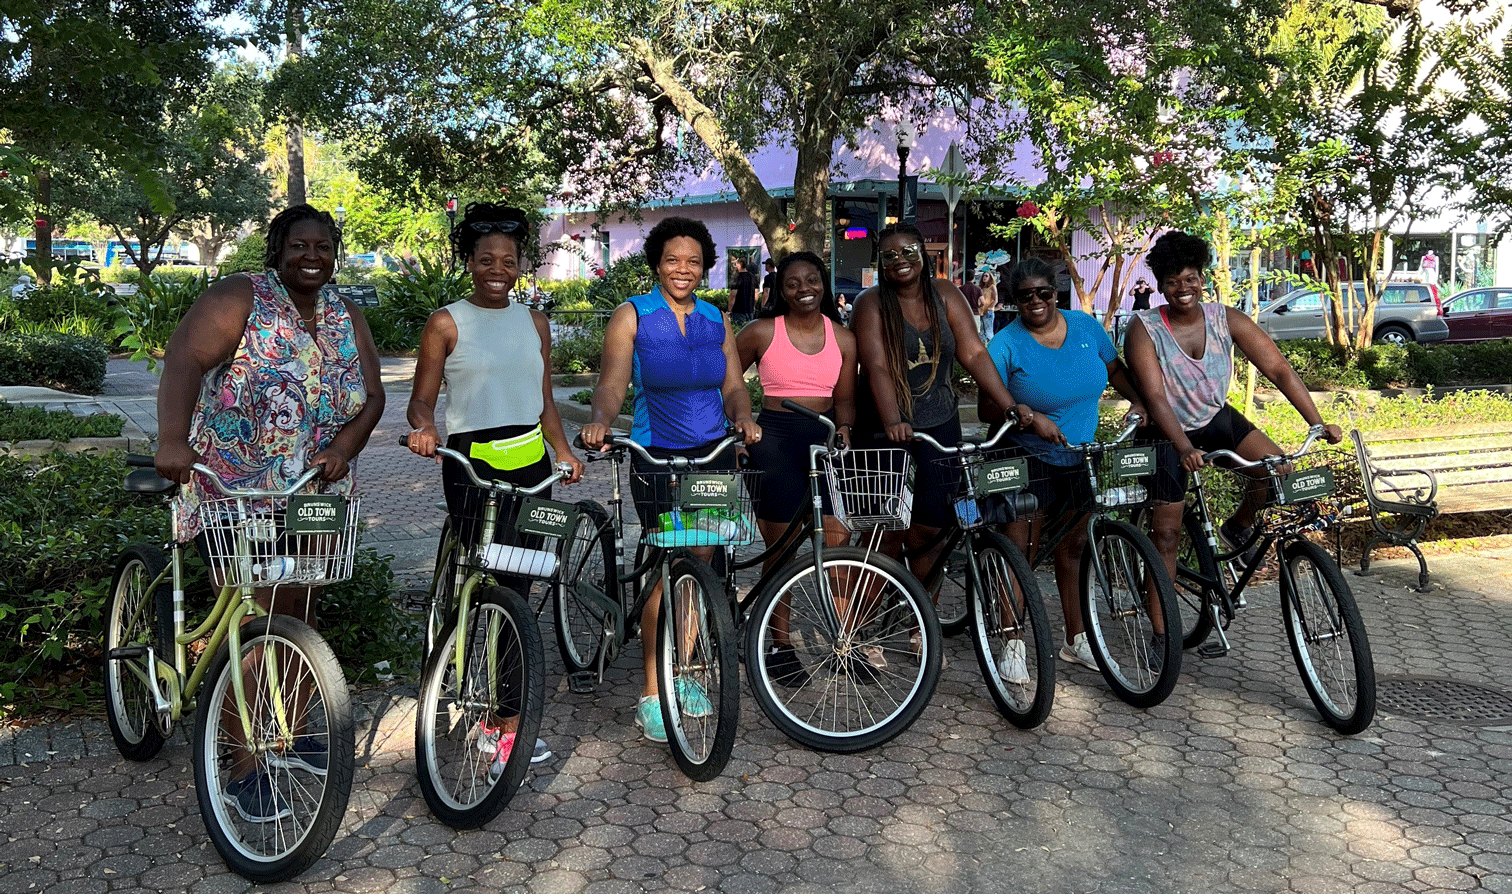 A group of women sitting on bicycles.